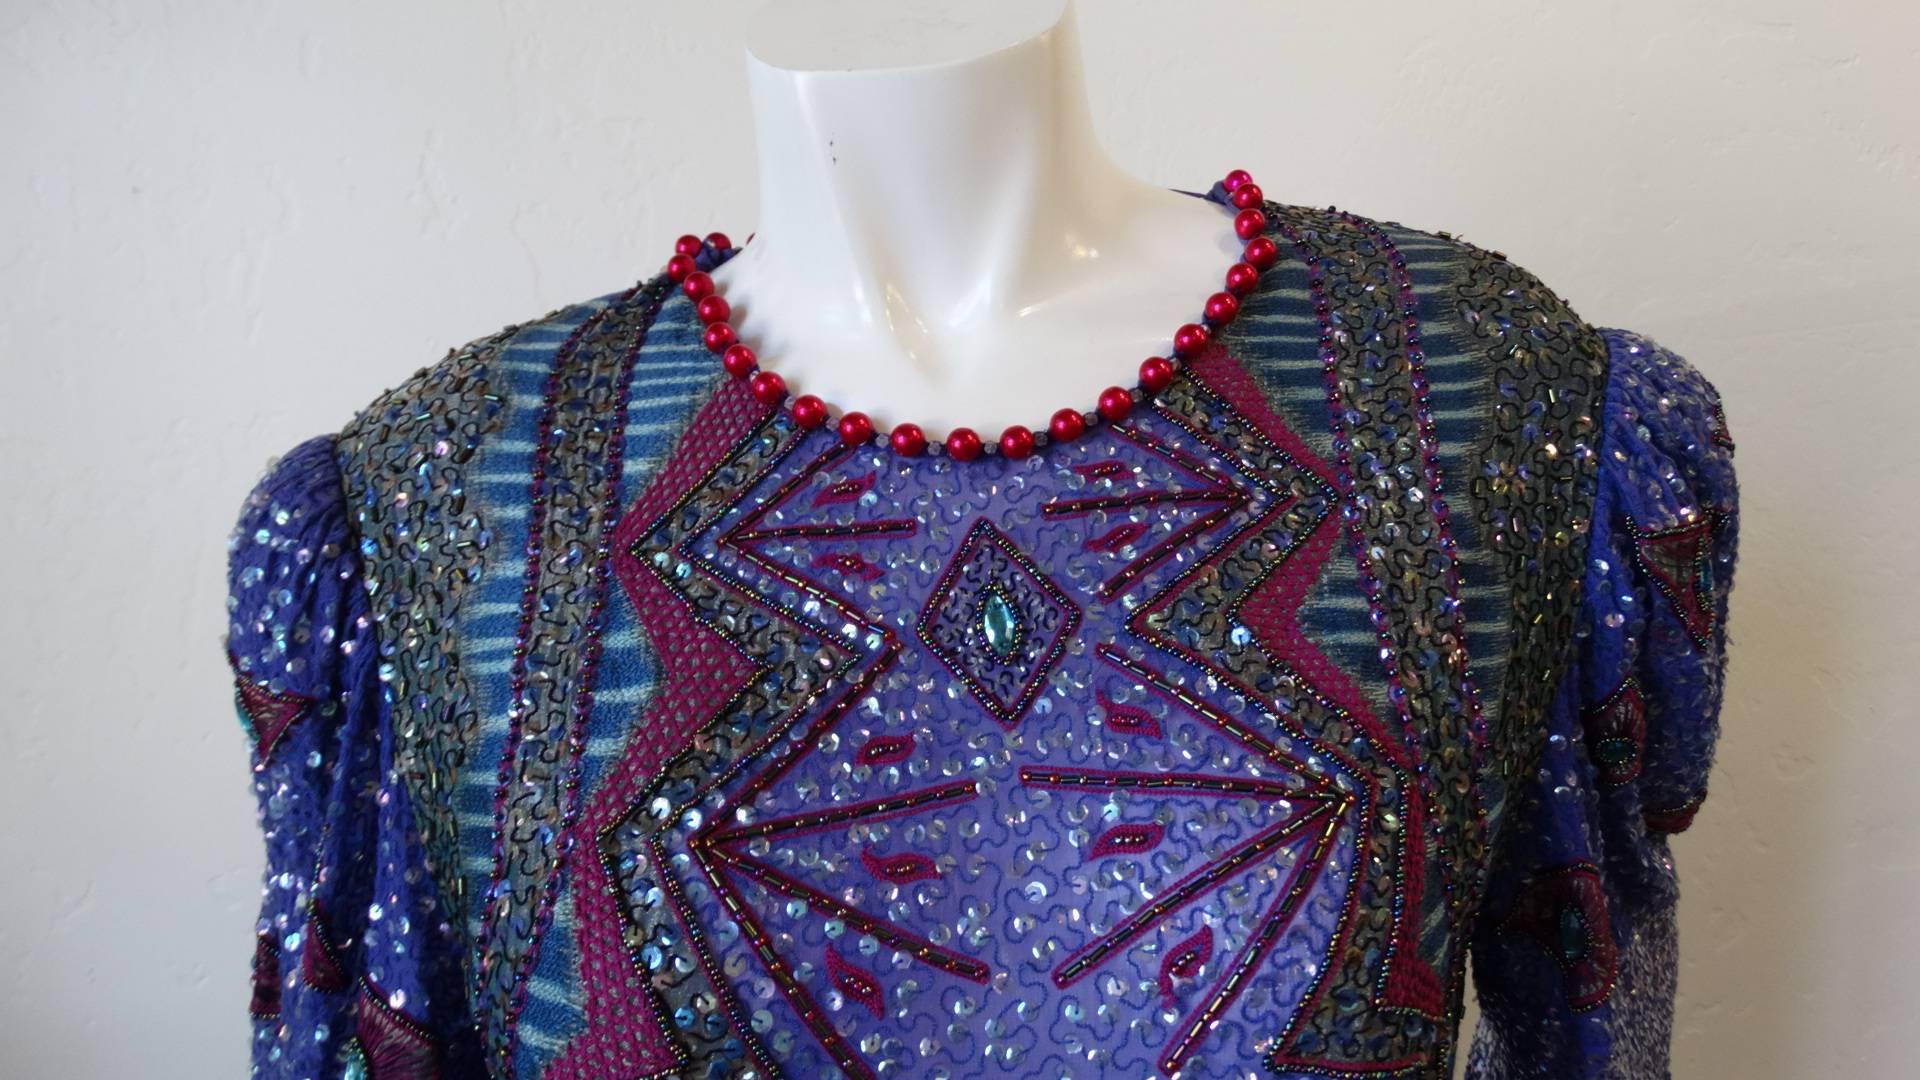 The most amazing embellished dress from iconic 1980s designer Zandra Rhodes! Constructed from a violet sequined silk fabric and absolutely covered in rhinestones and intricate beading! Accented with red round beads around the neckline. Kaftan style